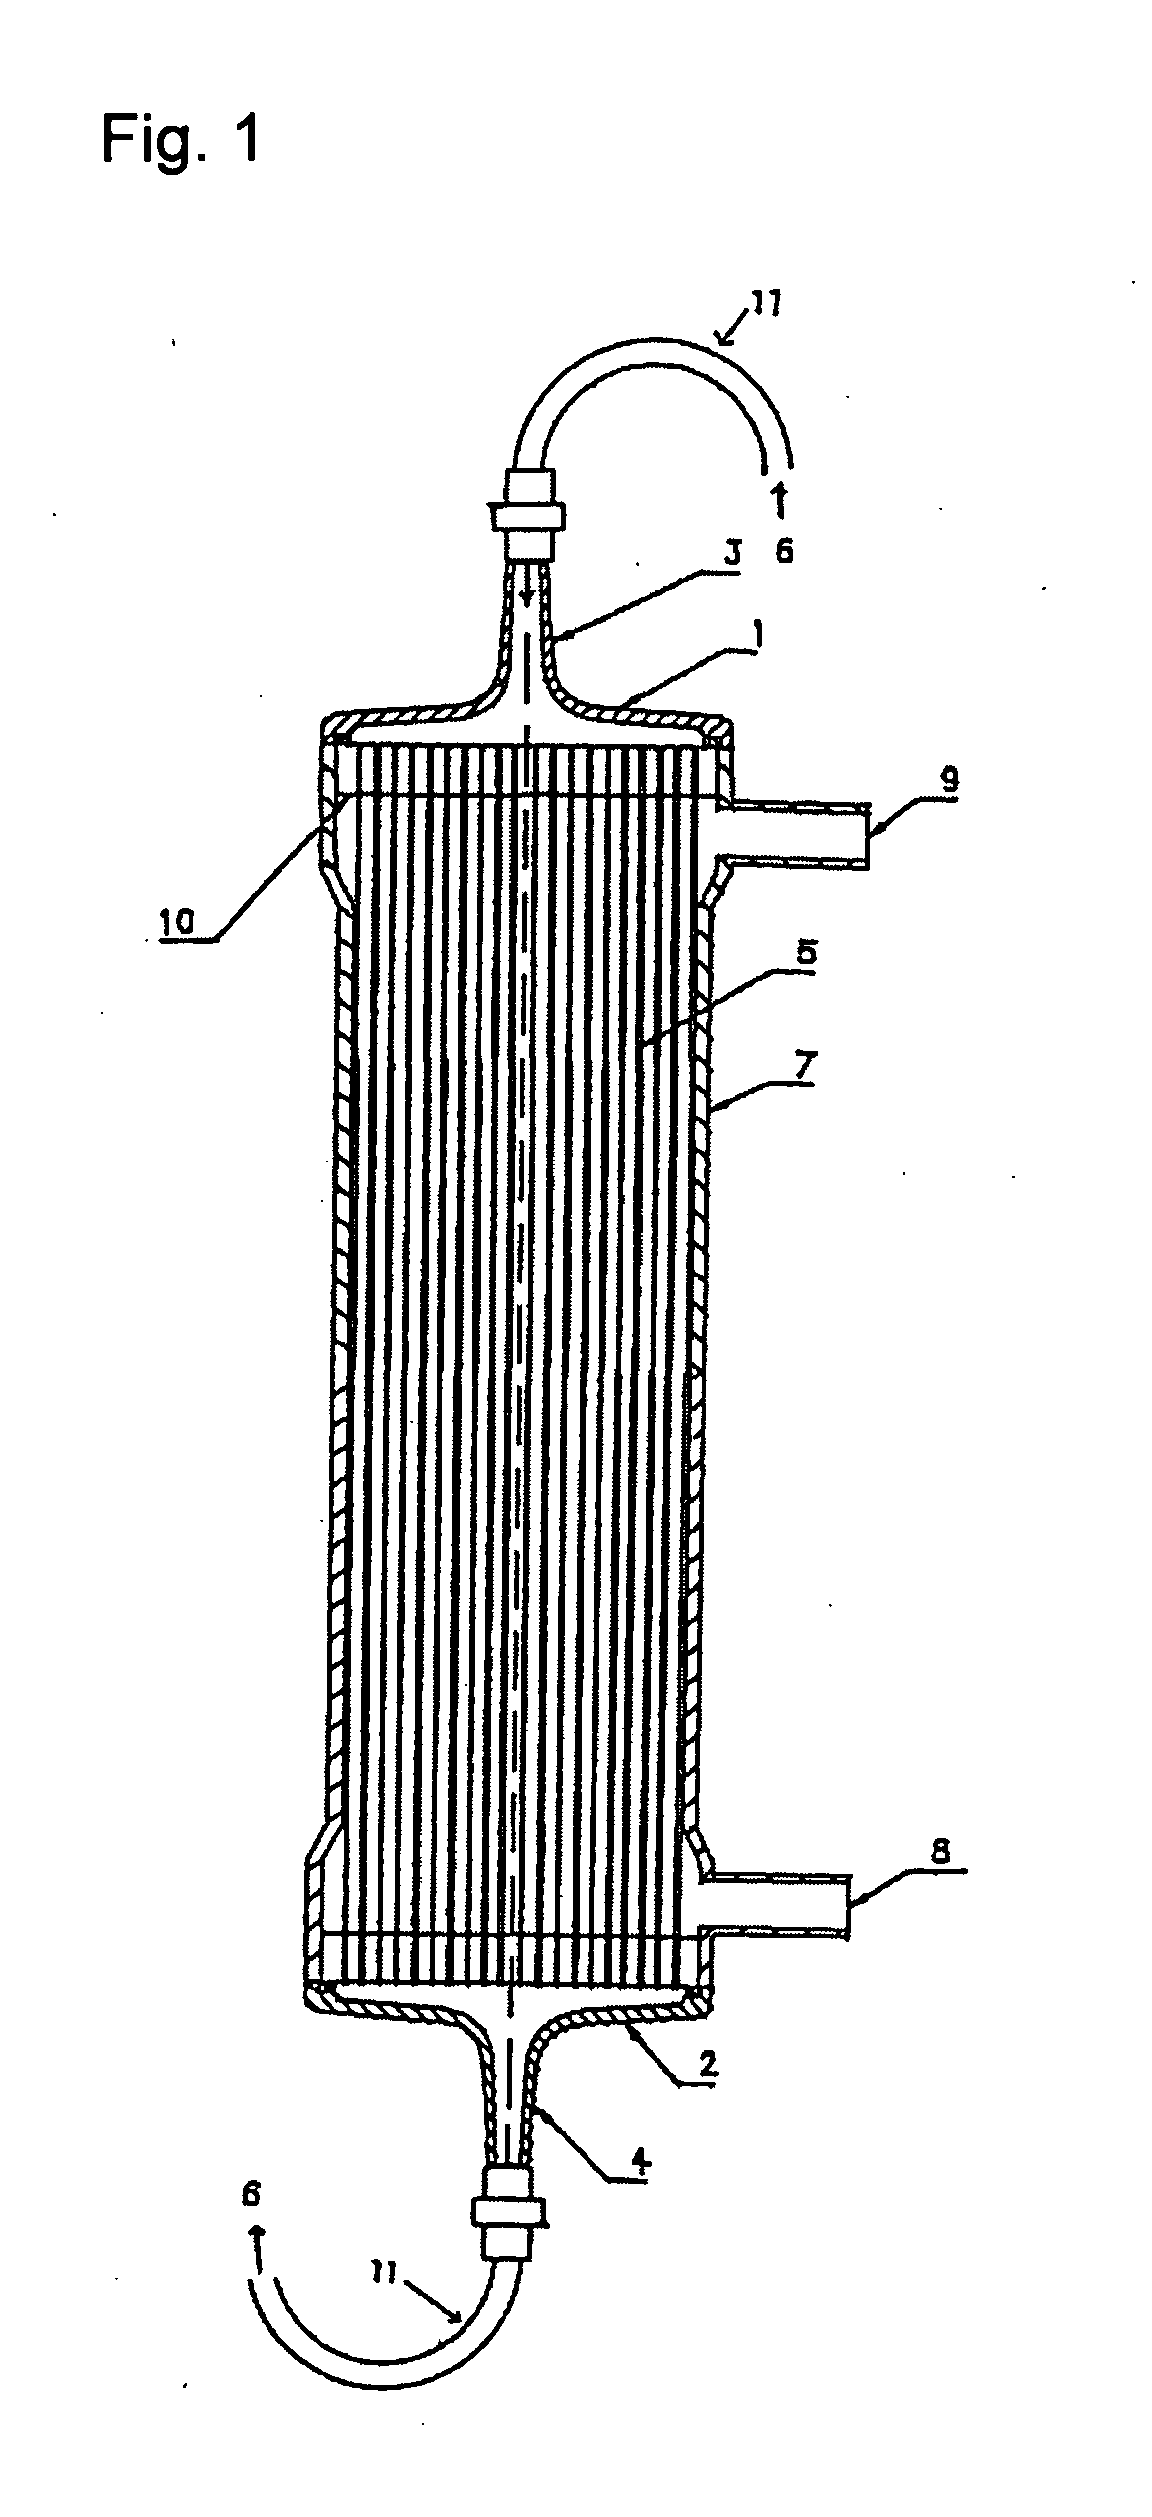 Process for producing modified substrate